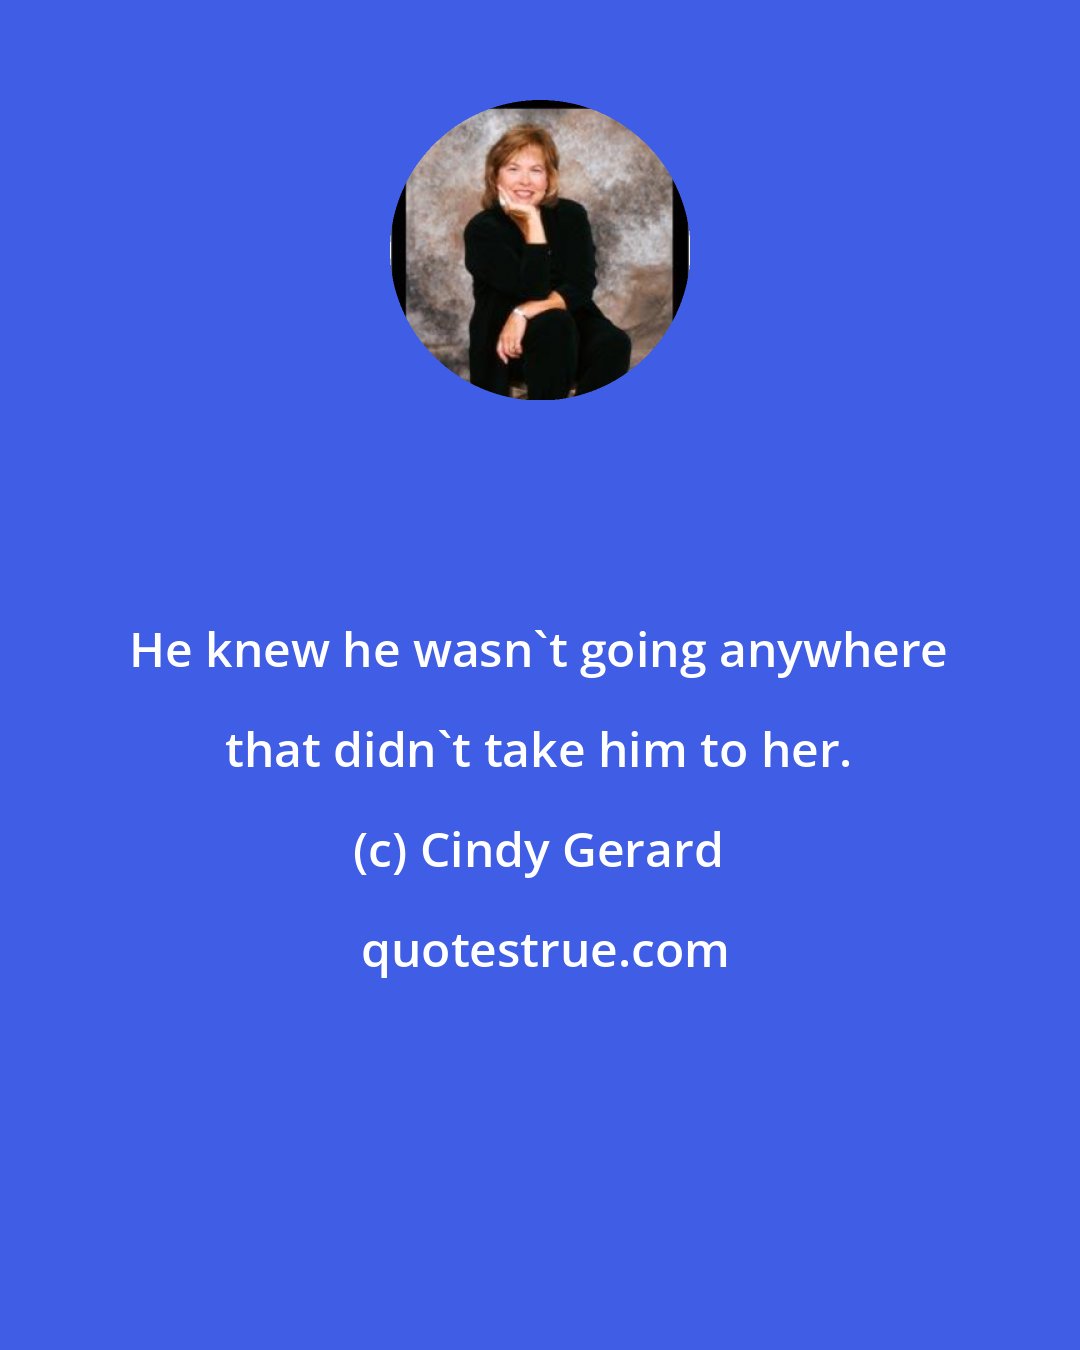 Cindy Gerard: He knew he wasn't going anywhere that didn't take him to her.